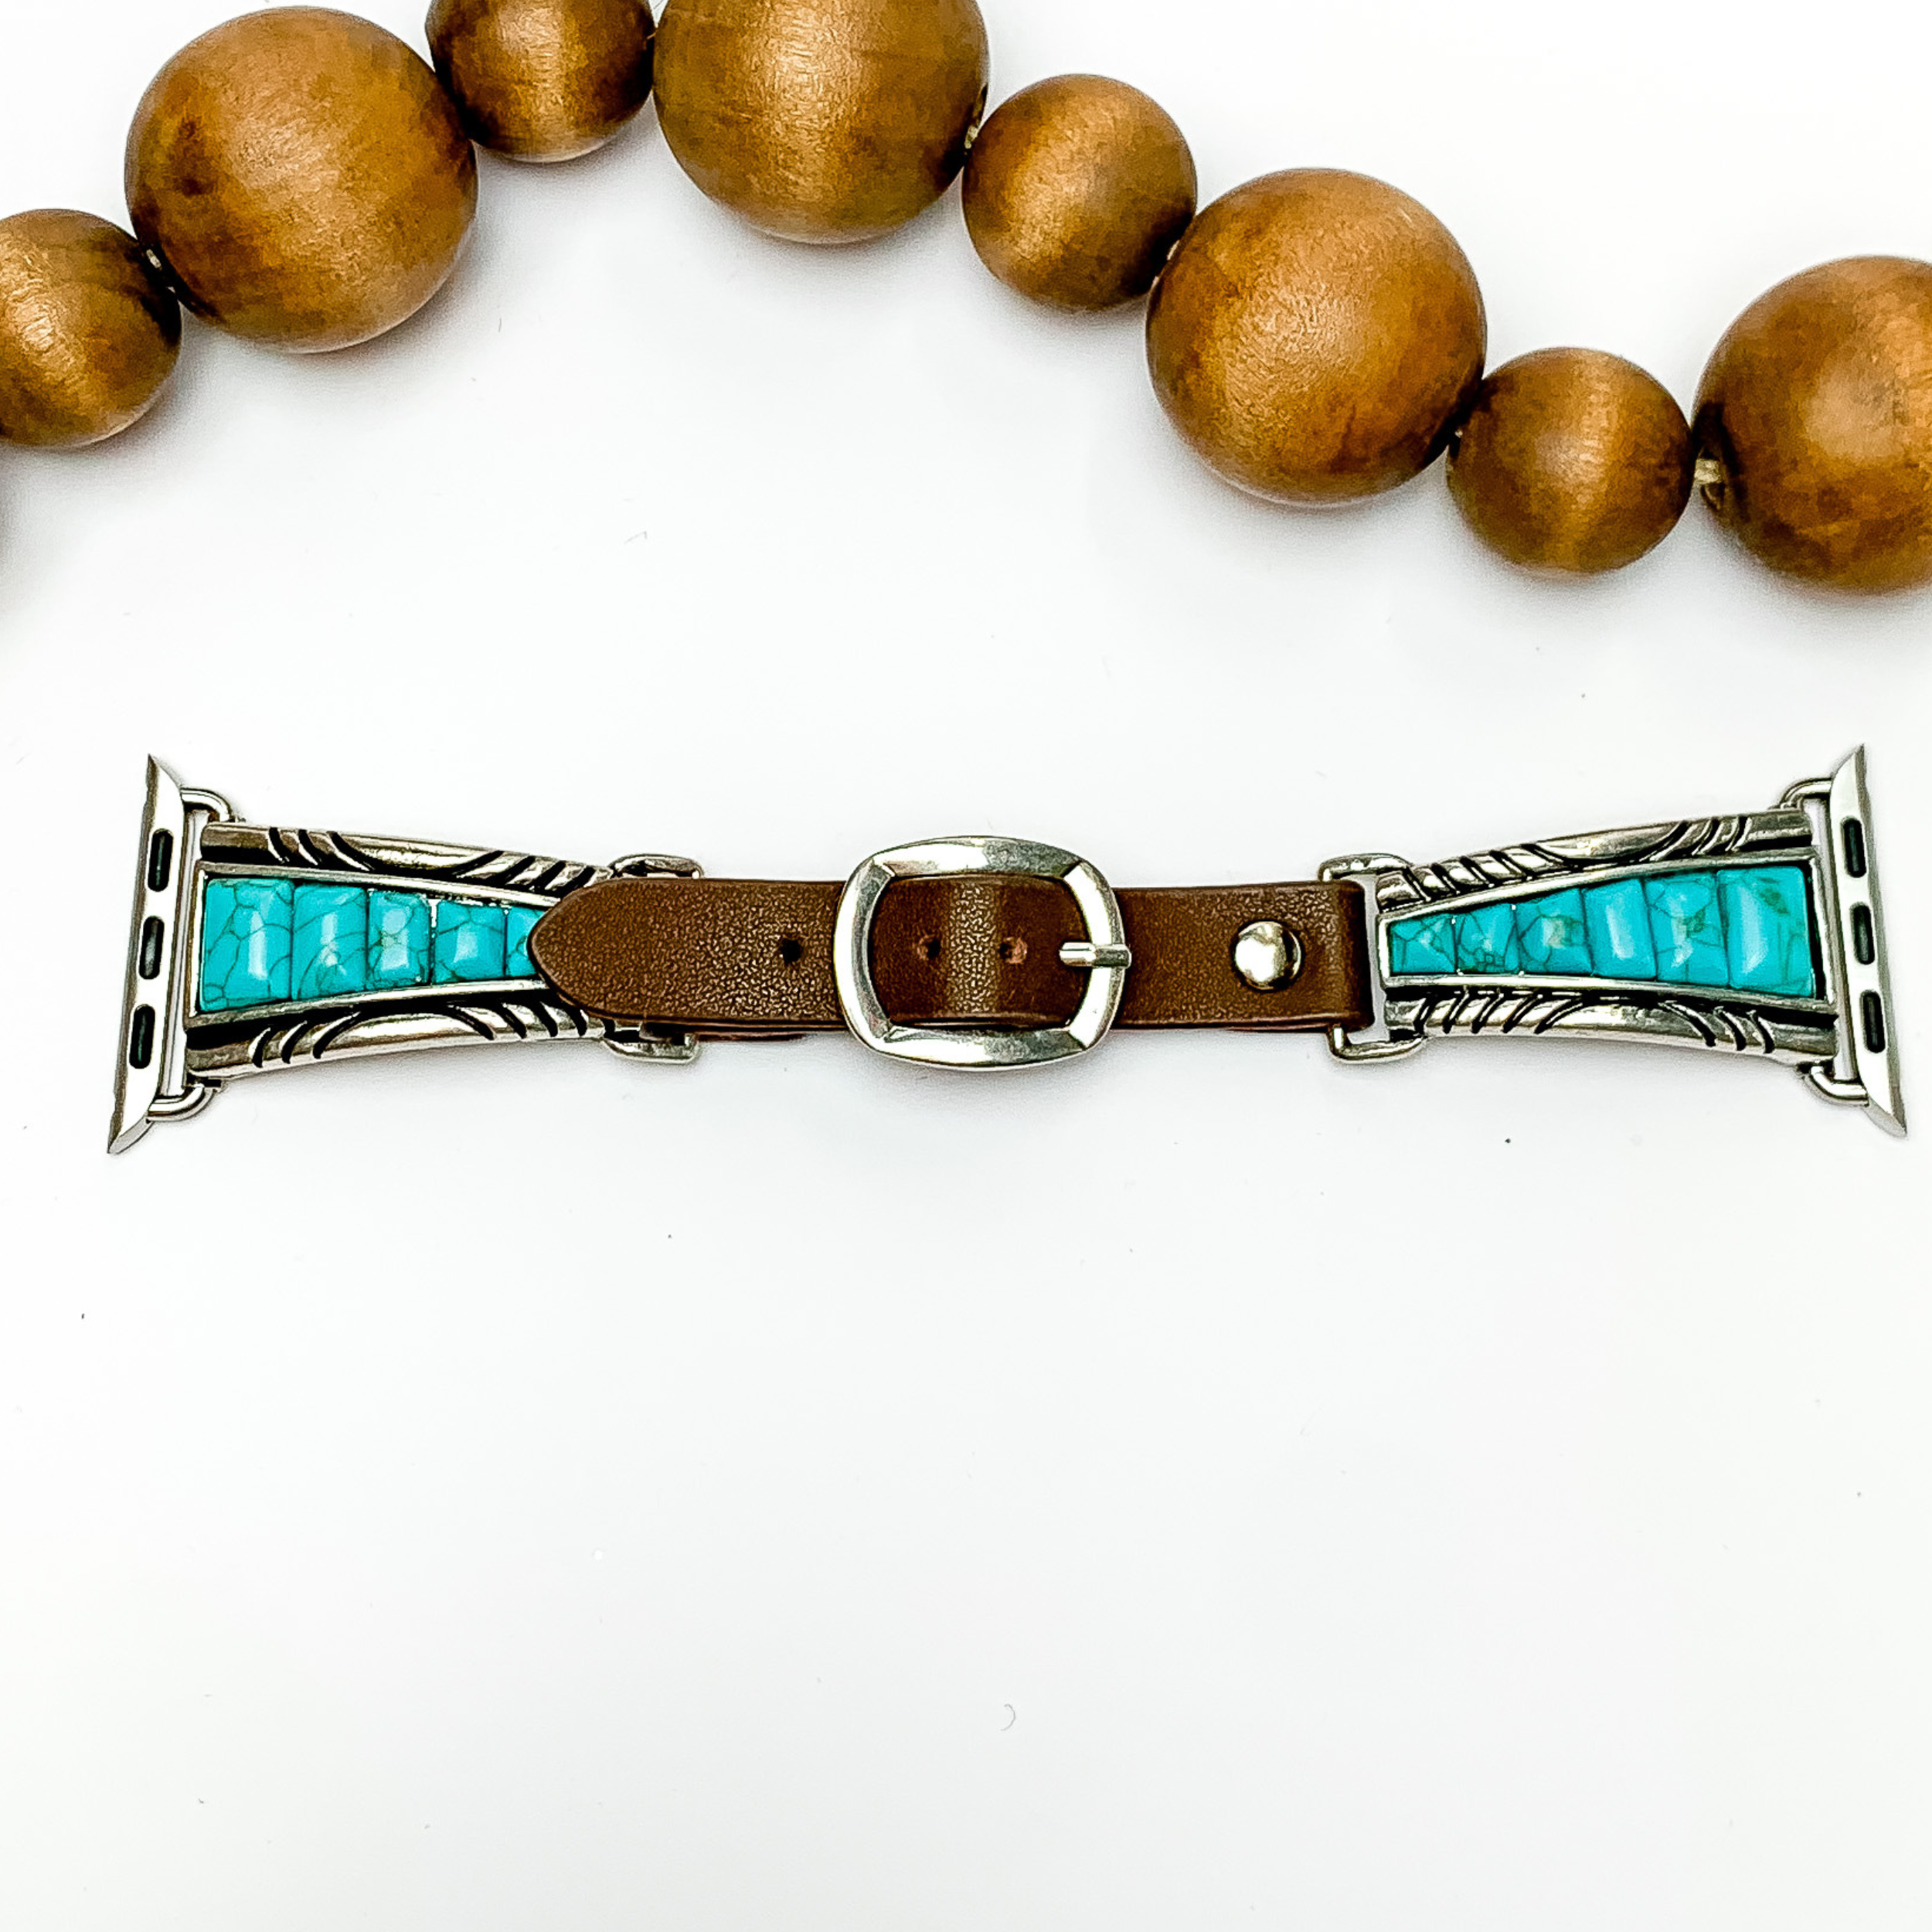 Dark Brown smart watch band with silver, five turquoise stone details going from big to small. The watch band has a western pendant with turquoise stones. This watch band is pictured on a white background with wooden beads above the watch.